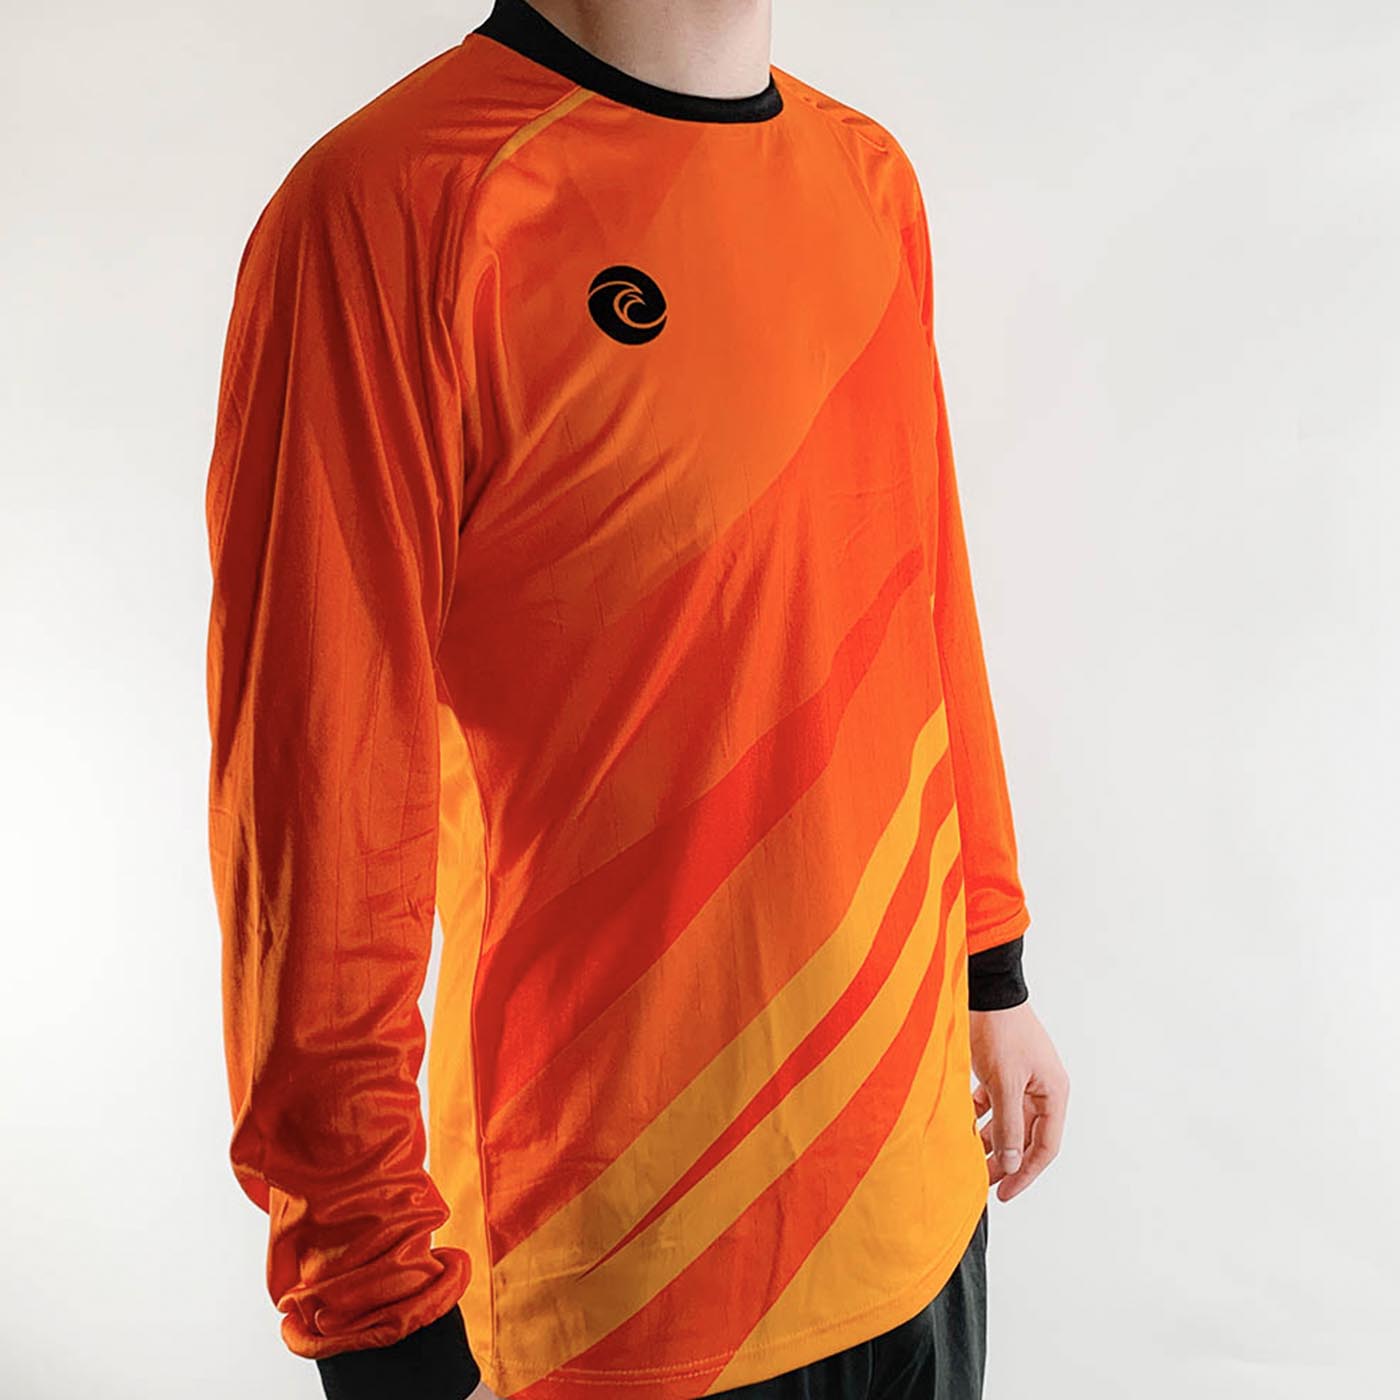 West Coast Goalkeeping S24F Limited Edition Jersey 2XL